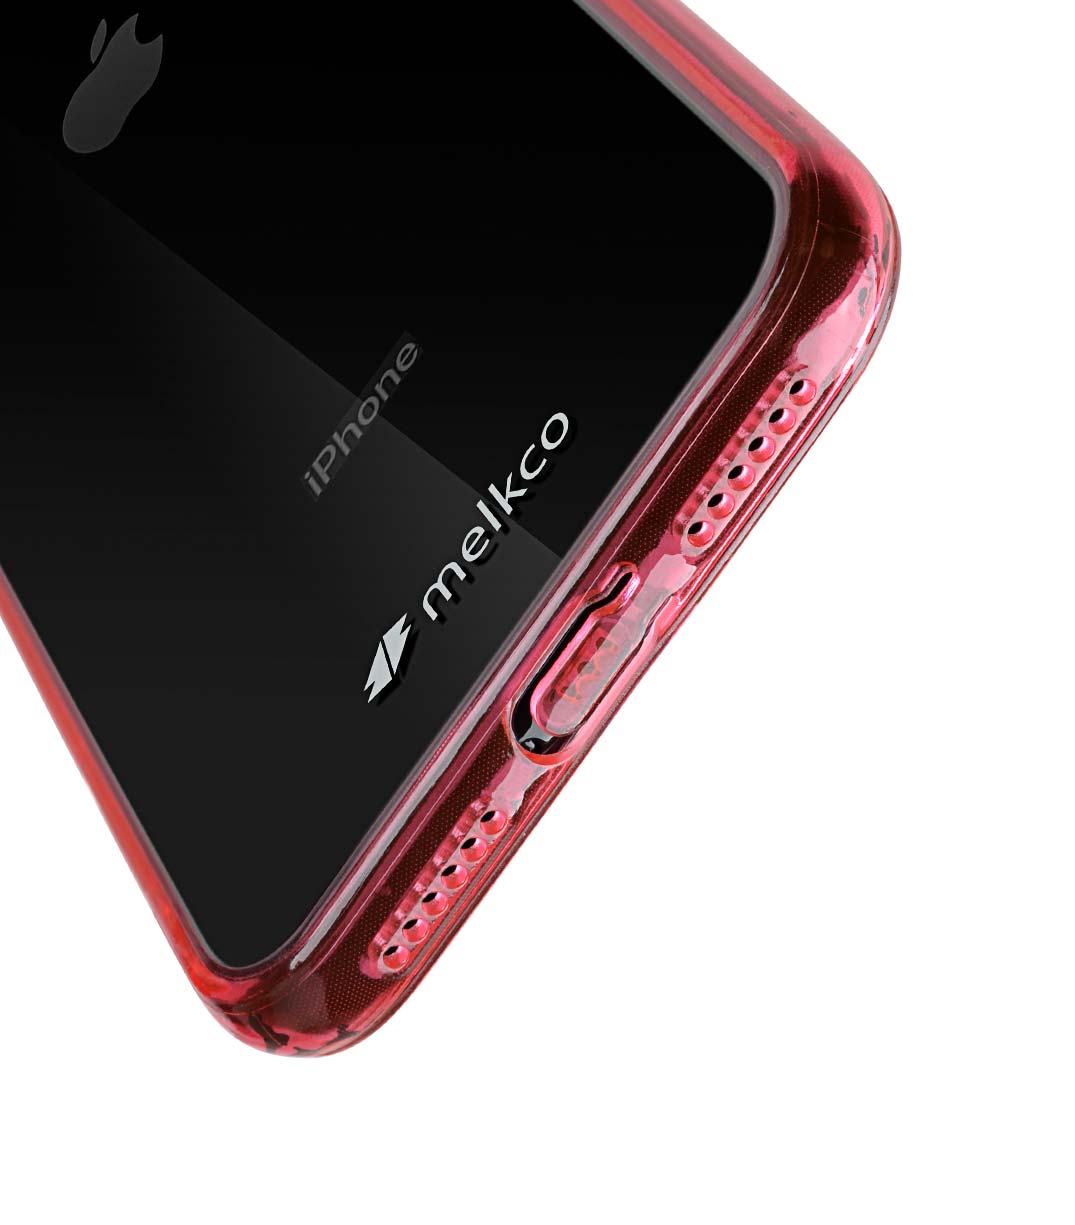 Melkco PolyUltima Case for Apple iPhone X - ( Transparent / Red )